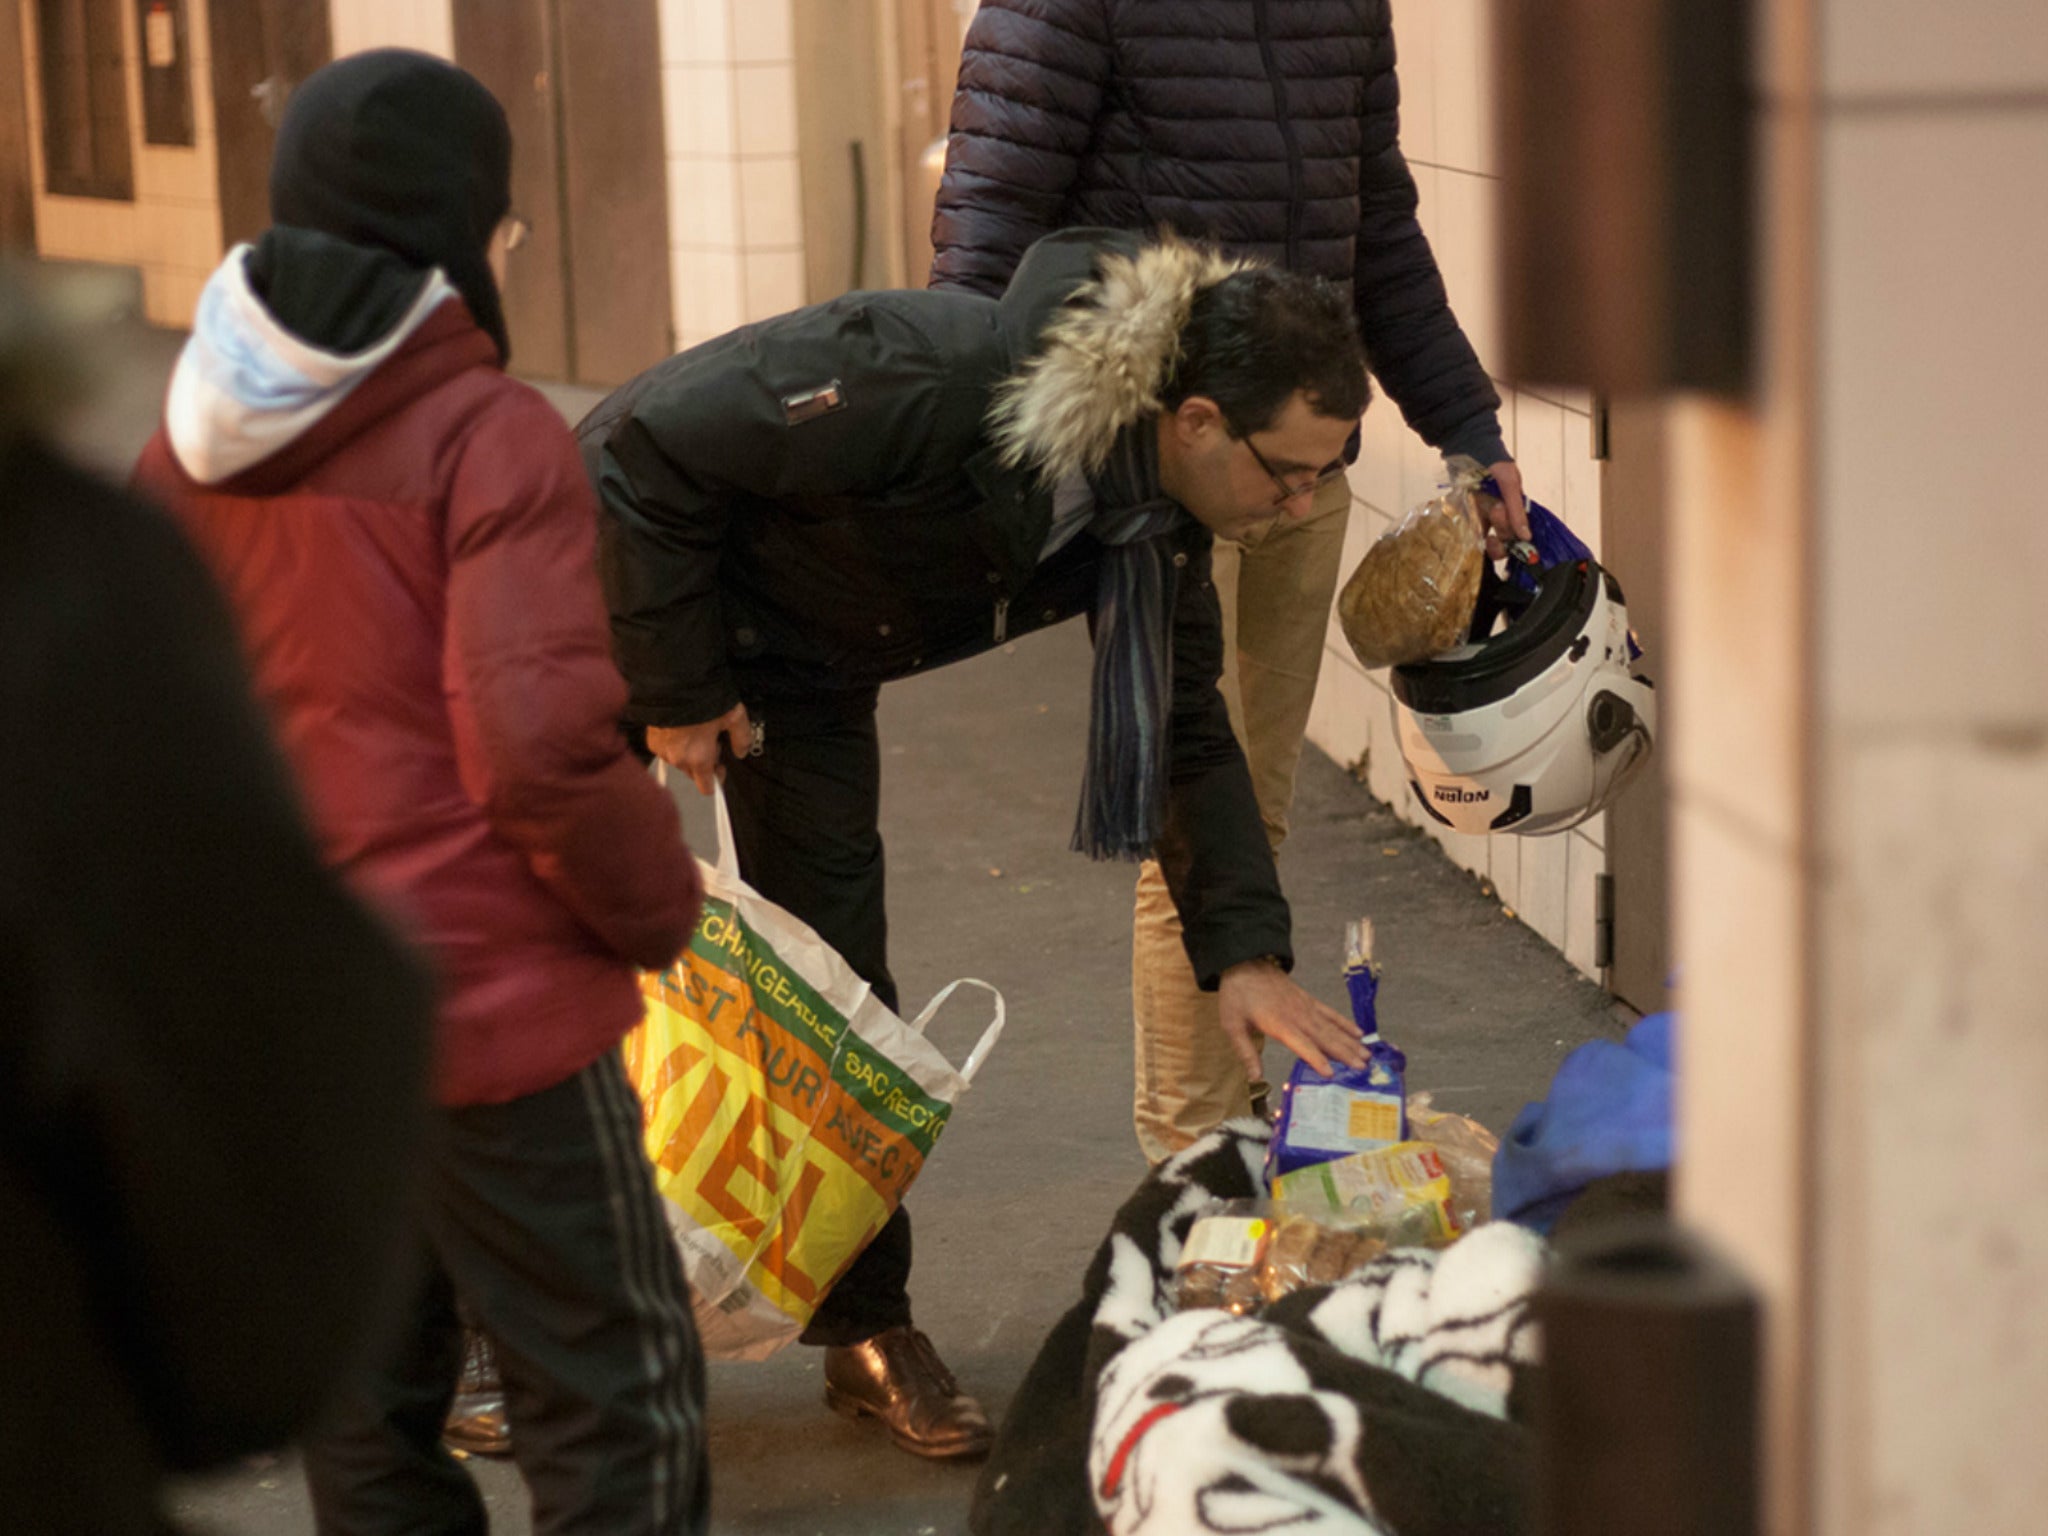 Arash sorts through food at a drop-off point in Courbevoie